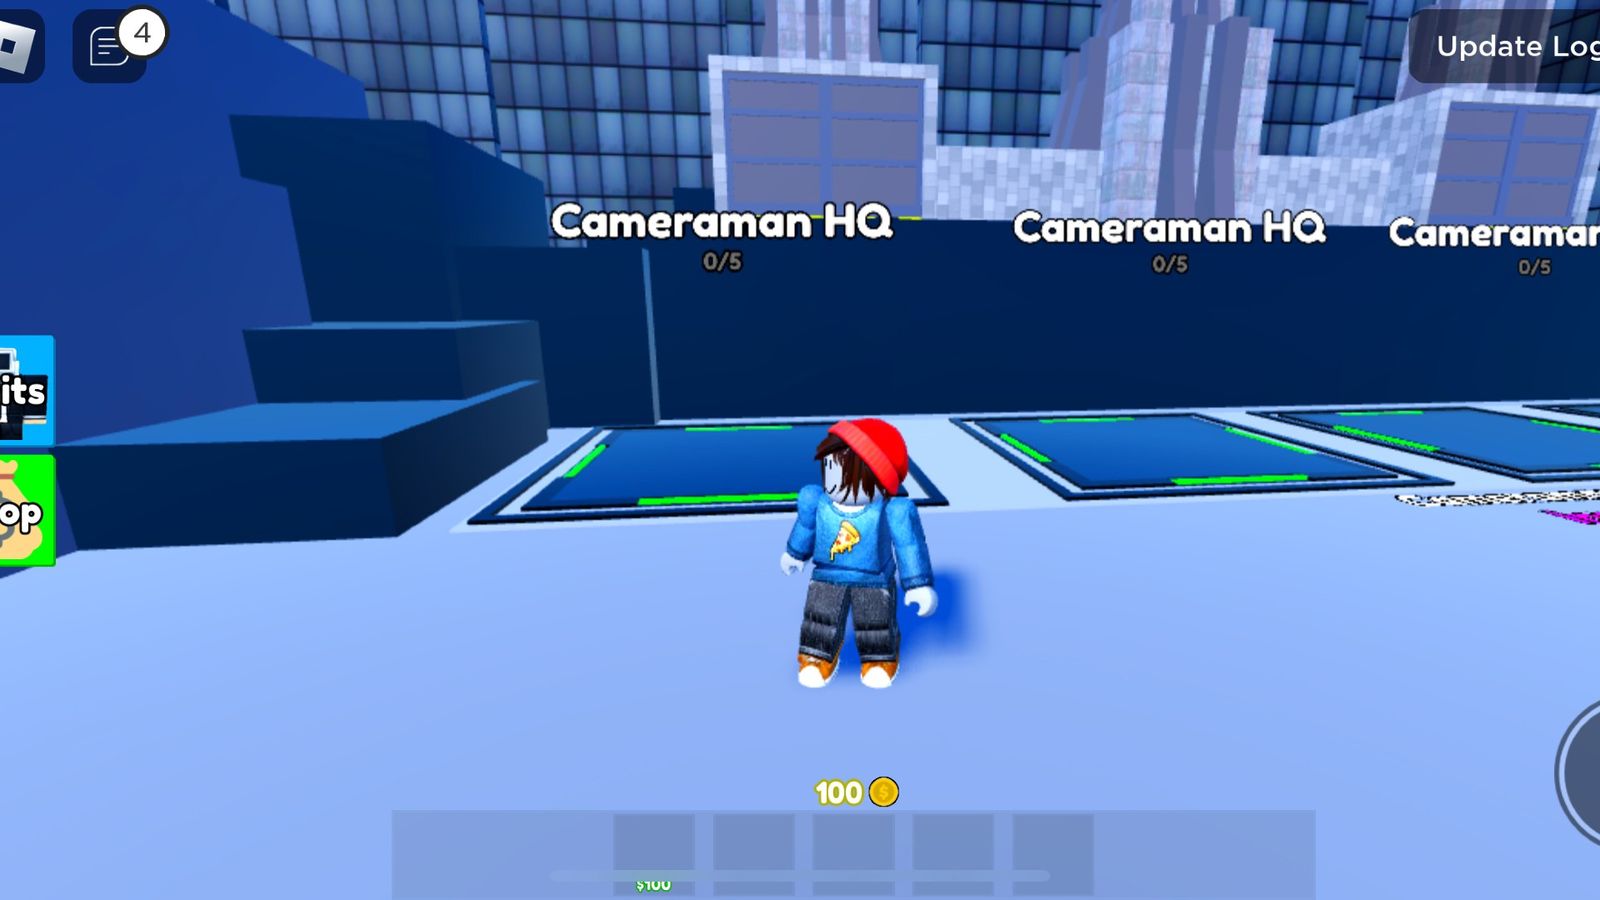 A gameplay snippet from Toilet Tower Defense in Roblox.